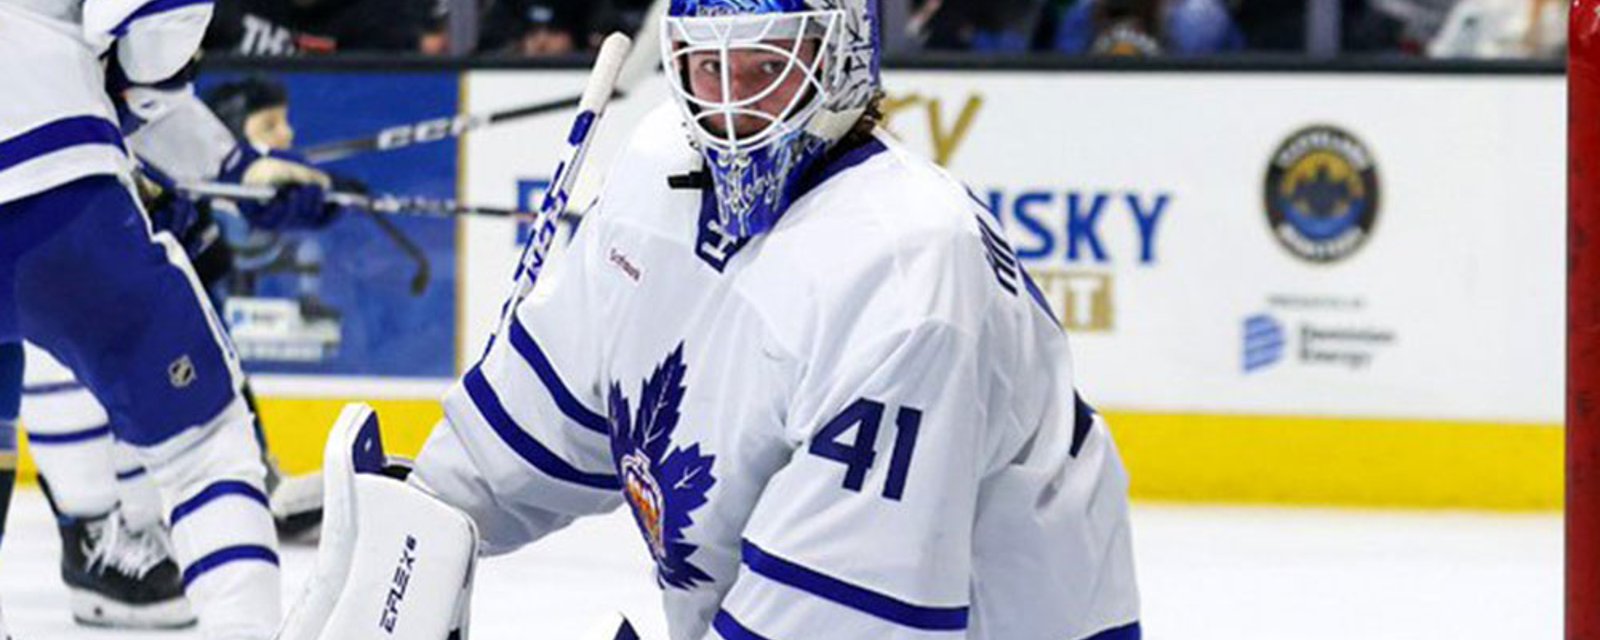 Leafs make a desperate move in goal due to injuries